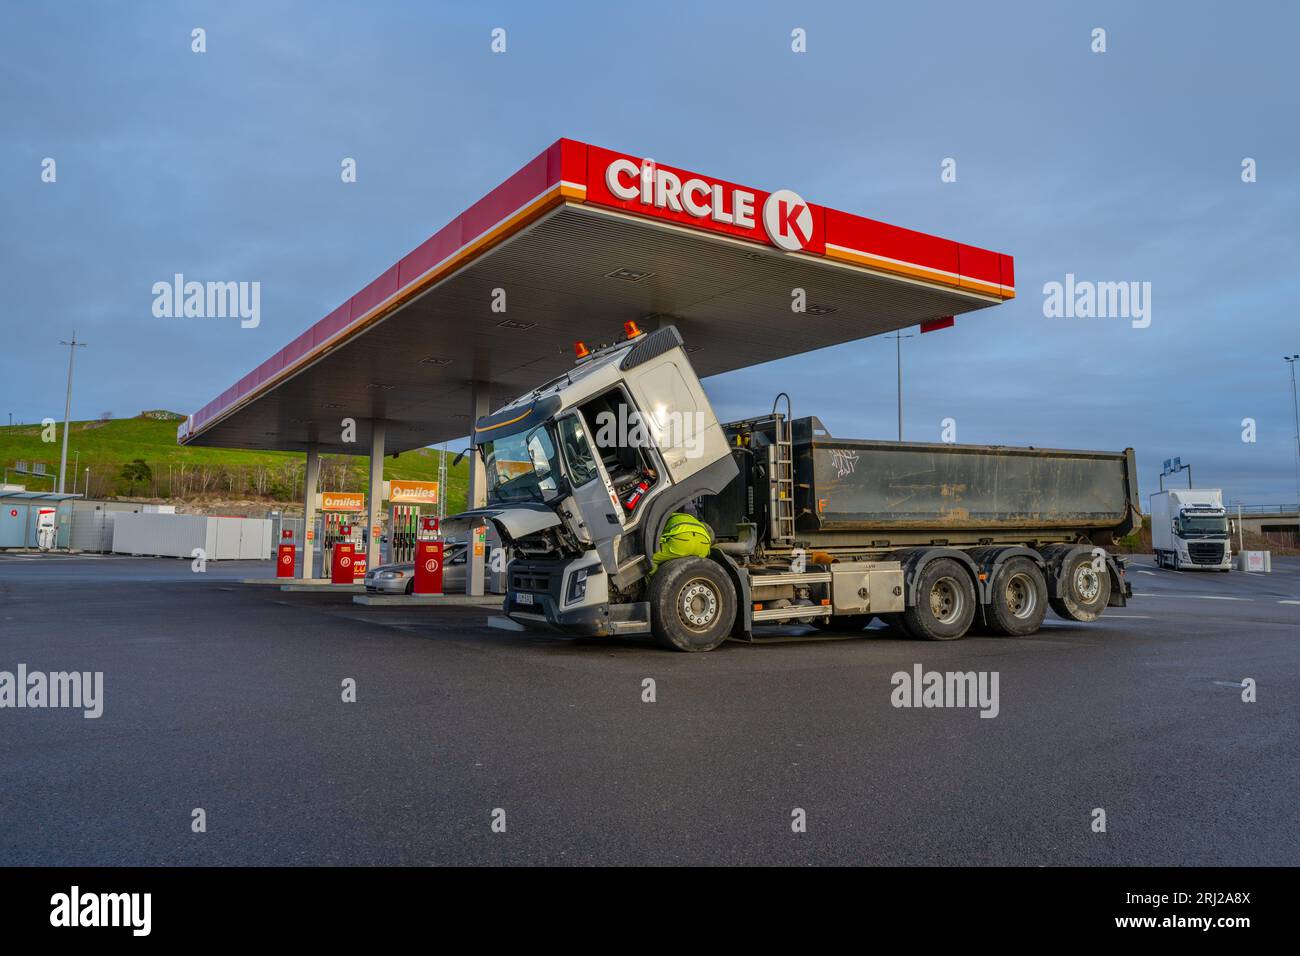 Gothenburg, Sweden - January 03 2023: Trucker checking the fuel filter of a large dump truck at a Circle K gas station Stock Photo